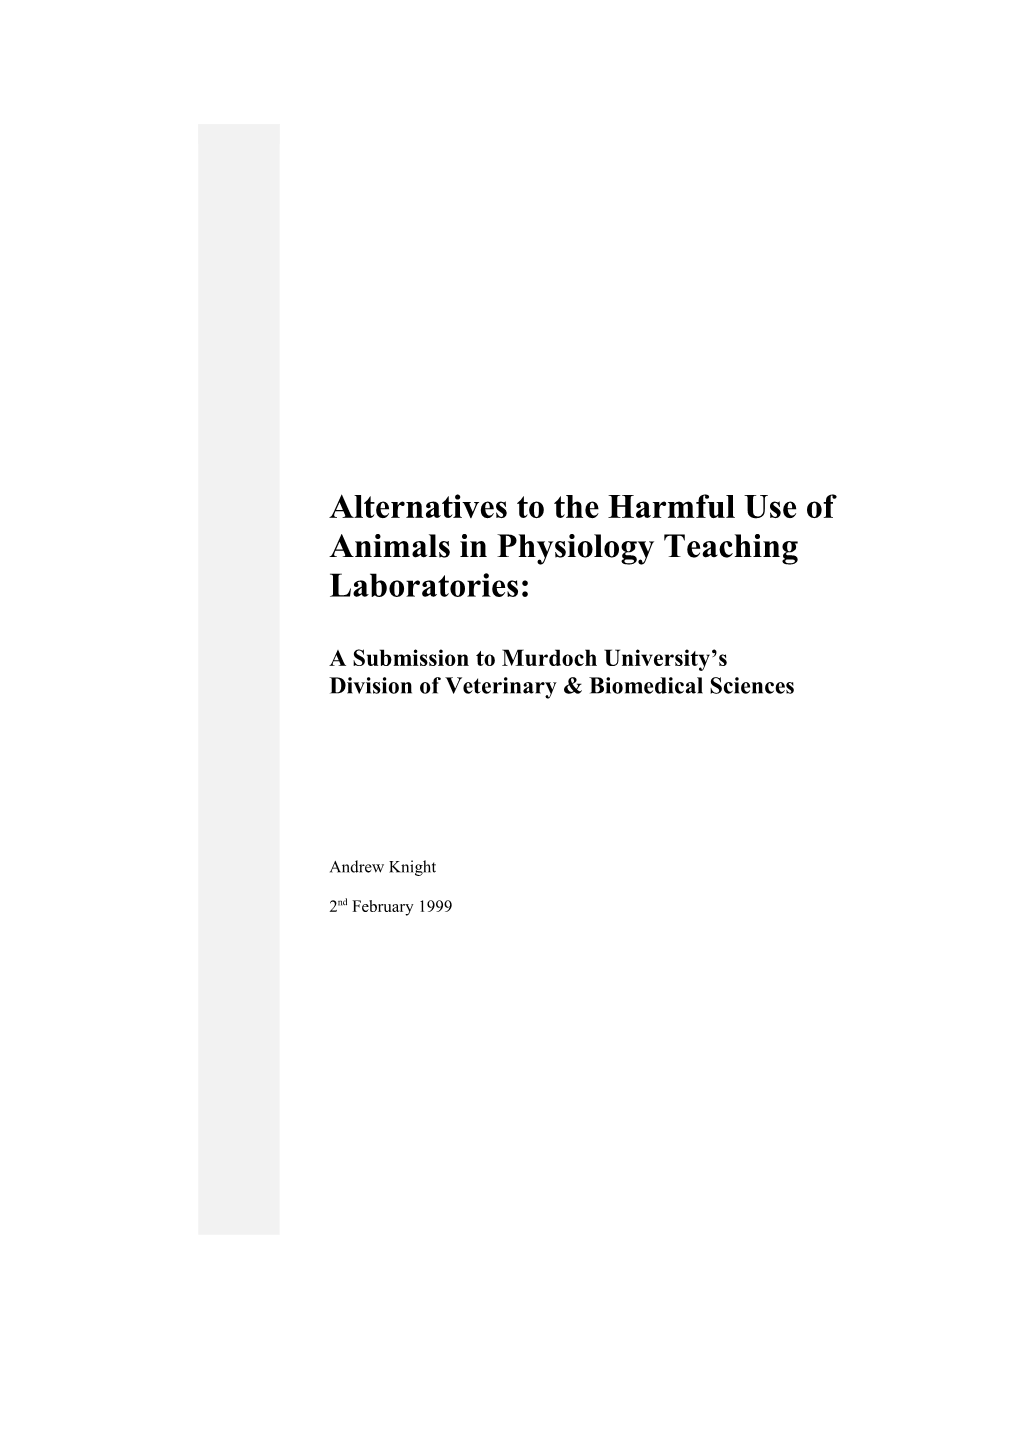 Alternatives to the Harmful Use of Animals in Physiology Teaching Laboratories